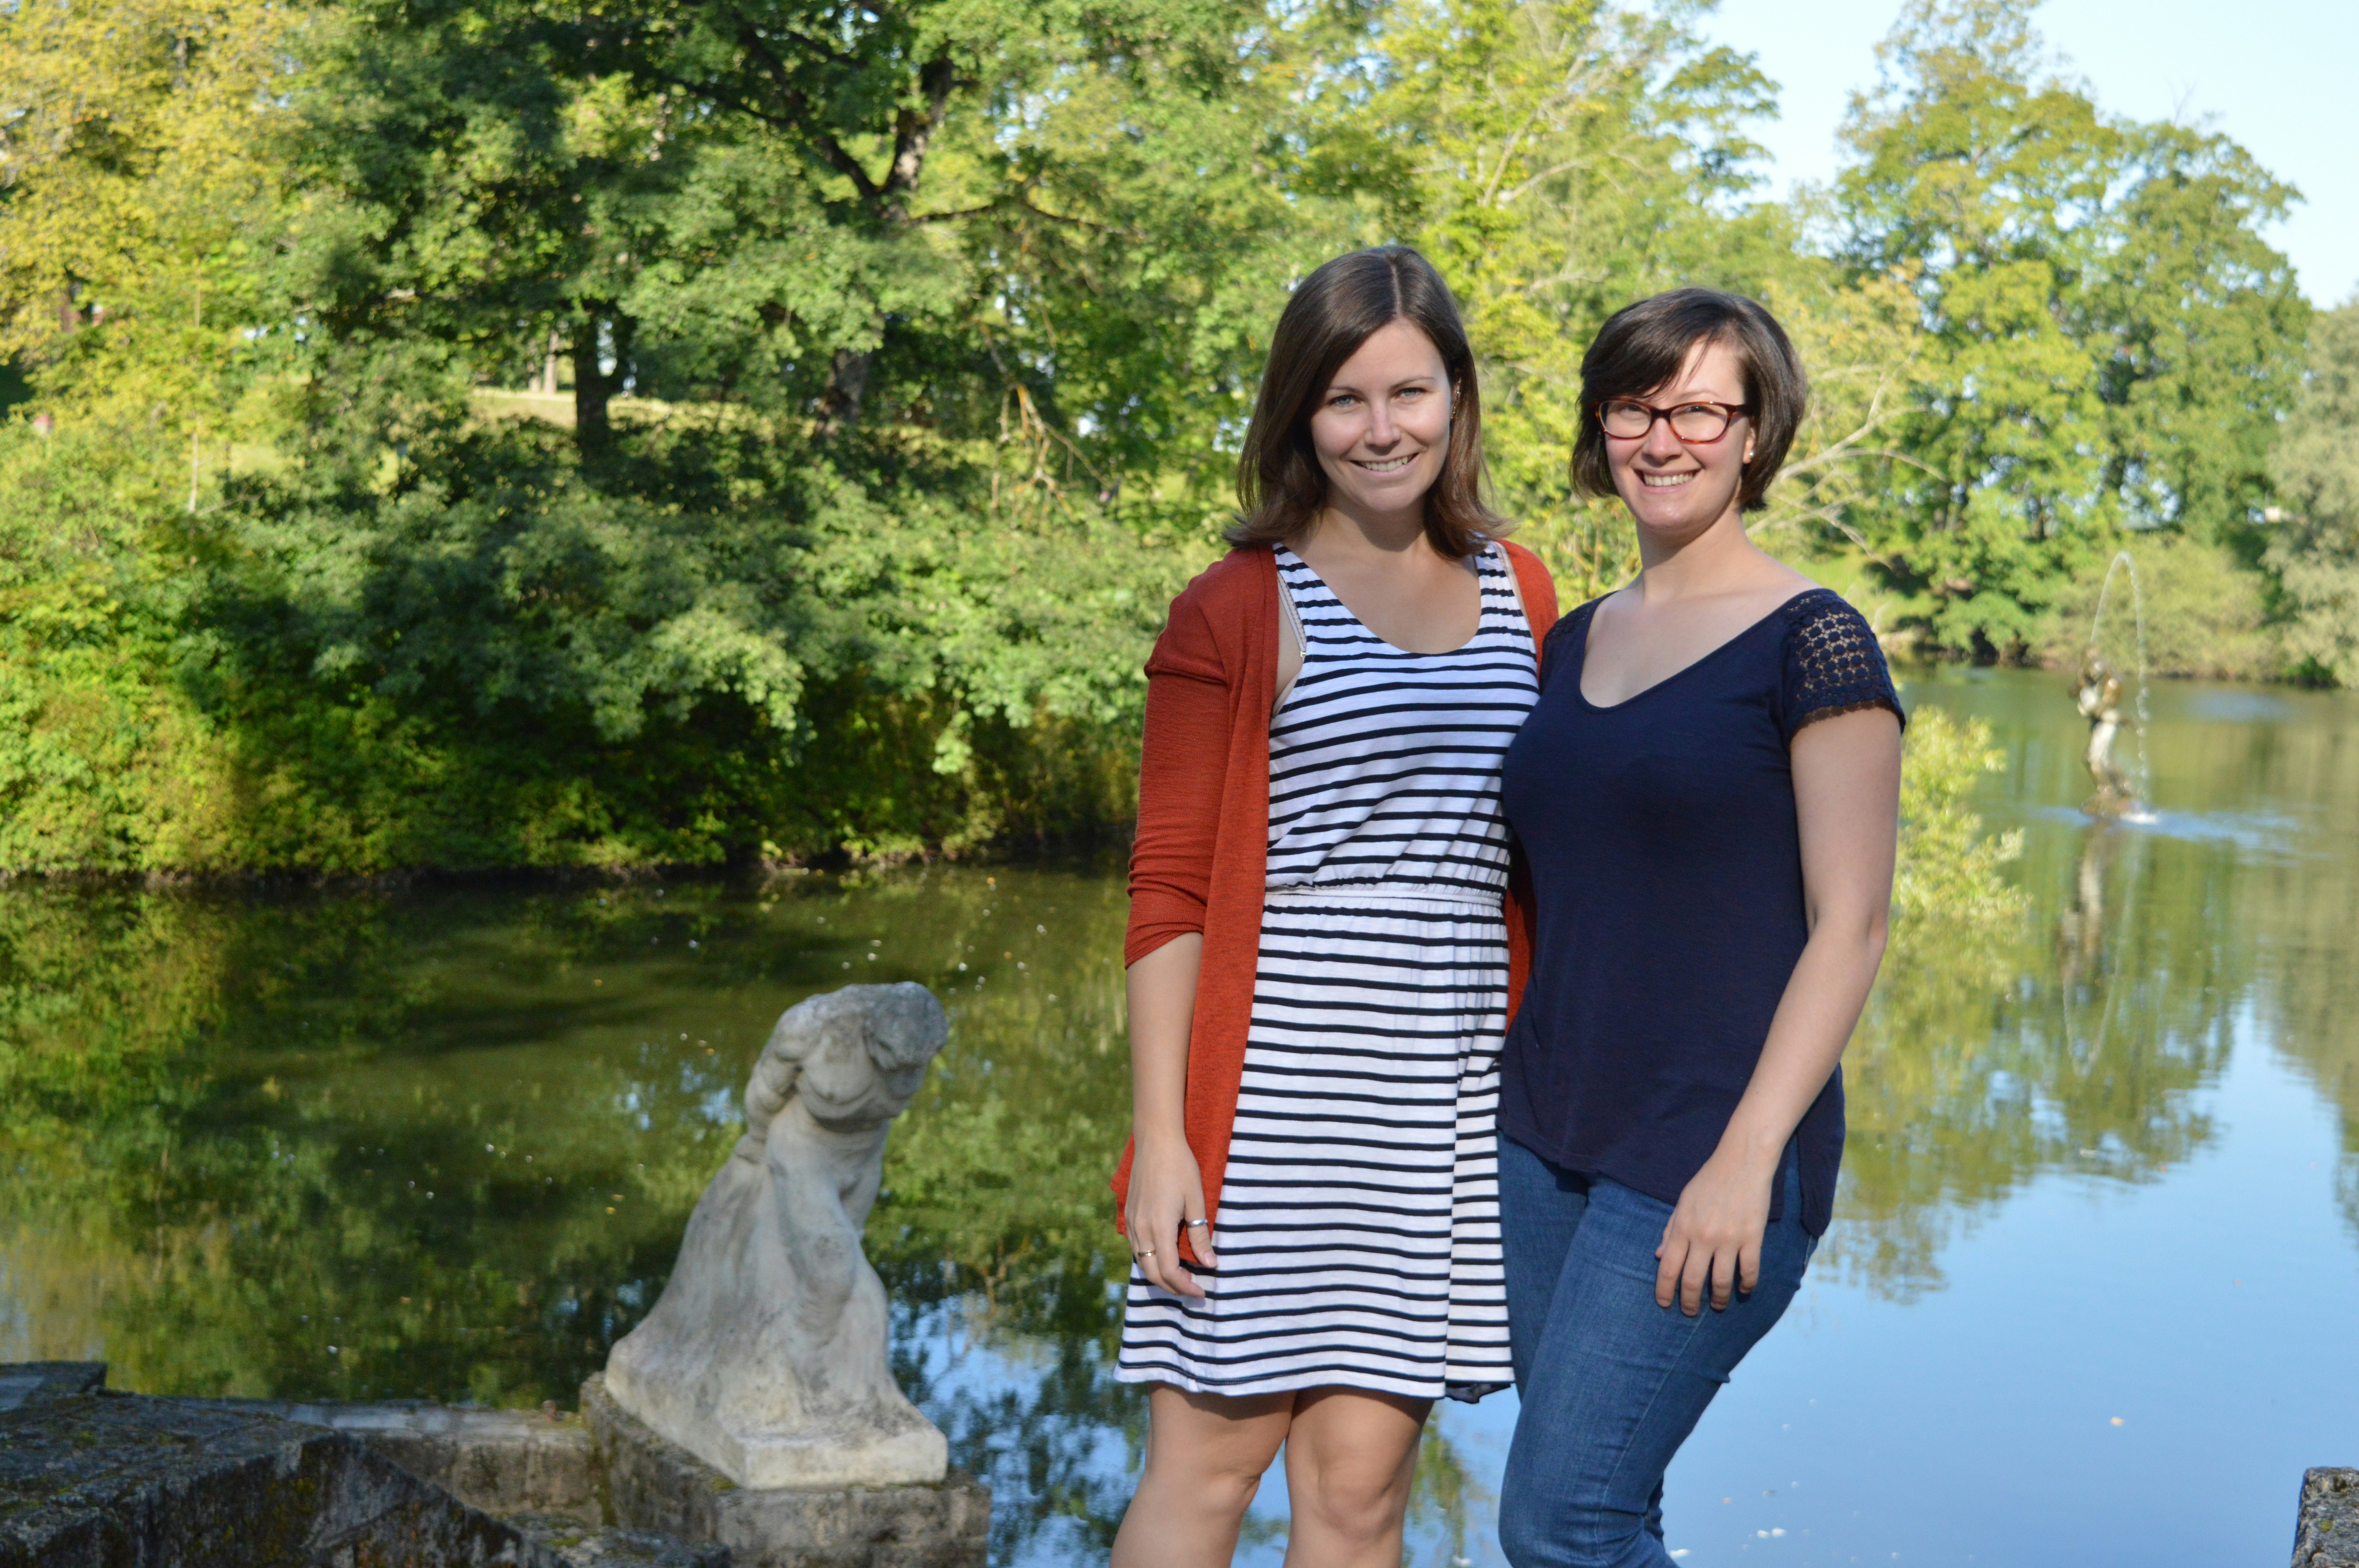 Emma and her friend Helen stand in front of a green lake with trees in the background and a statue in front of it.